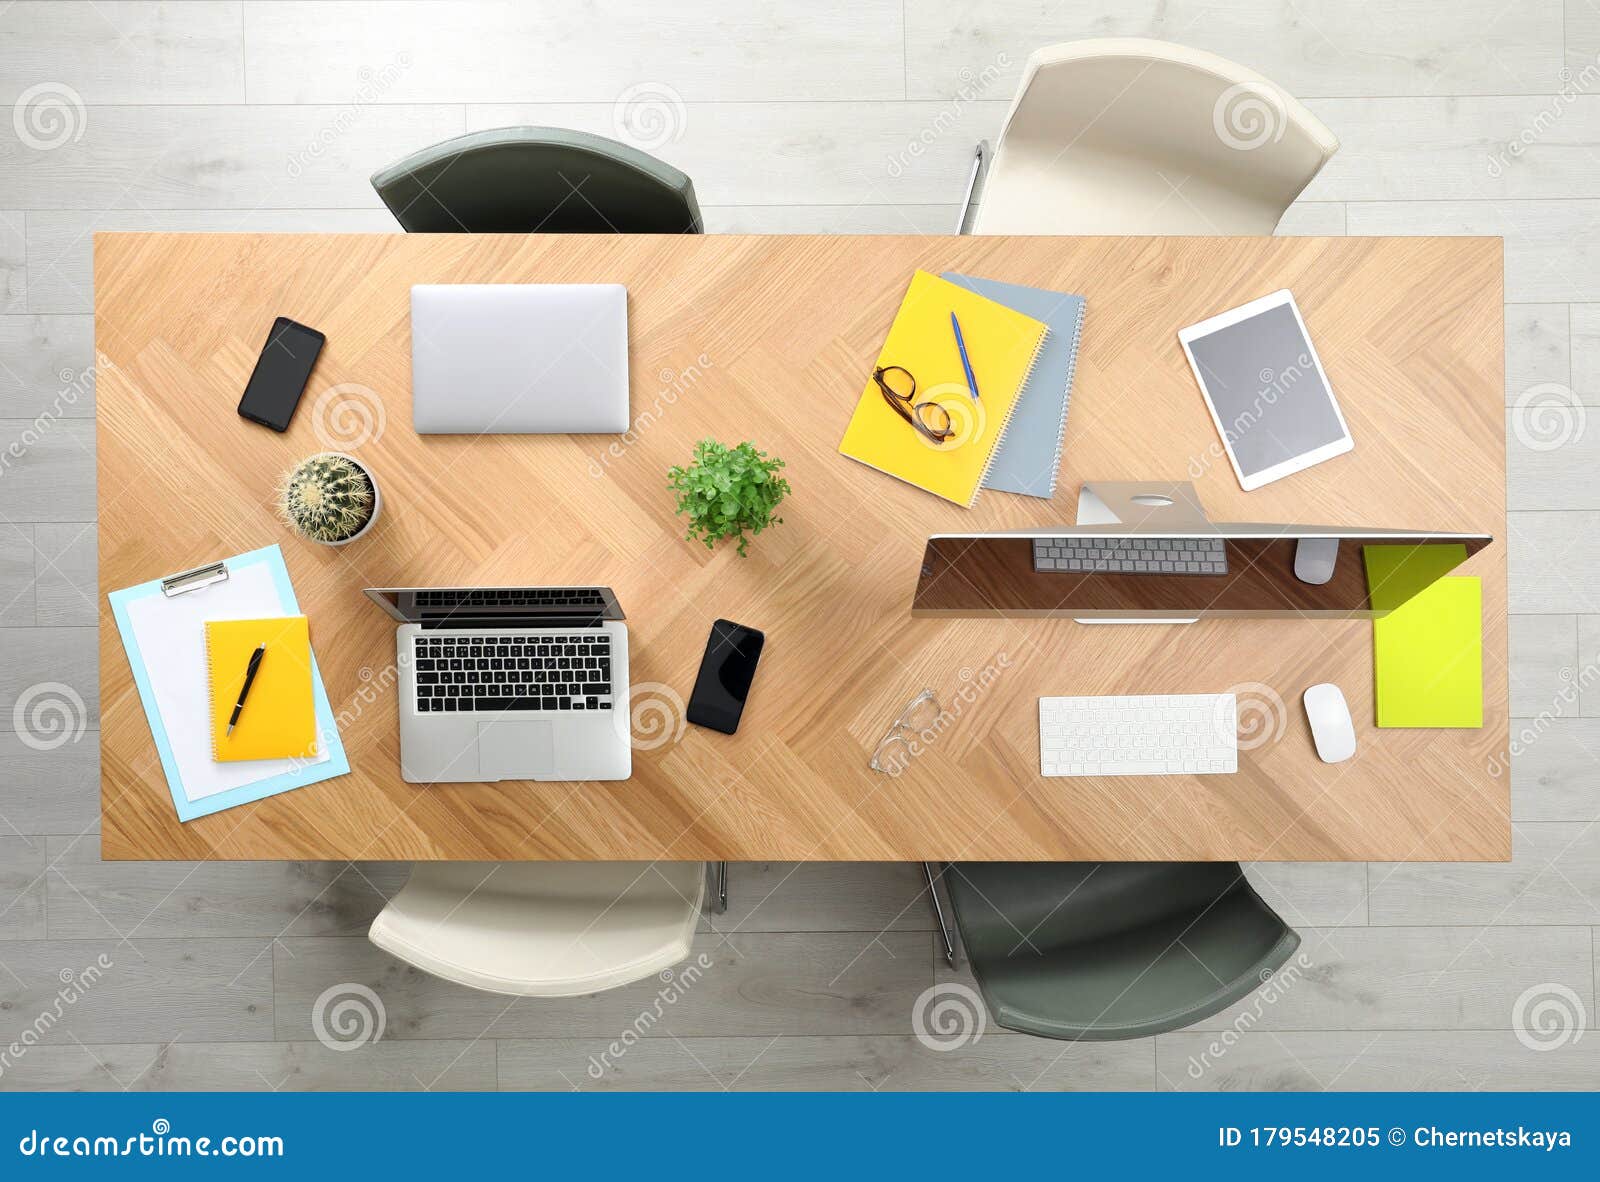 Modern Office Table With Devices And Chairs Stock Image Image Of